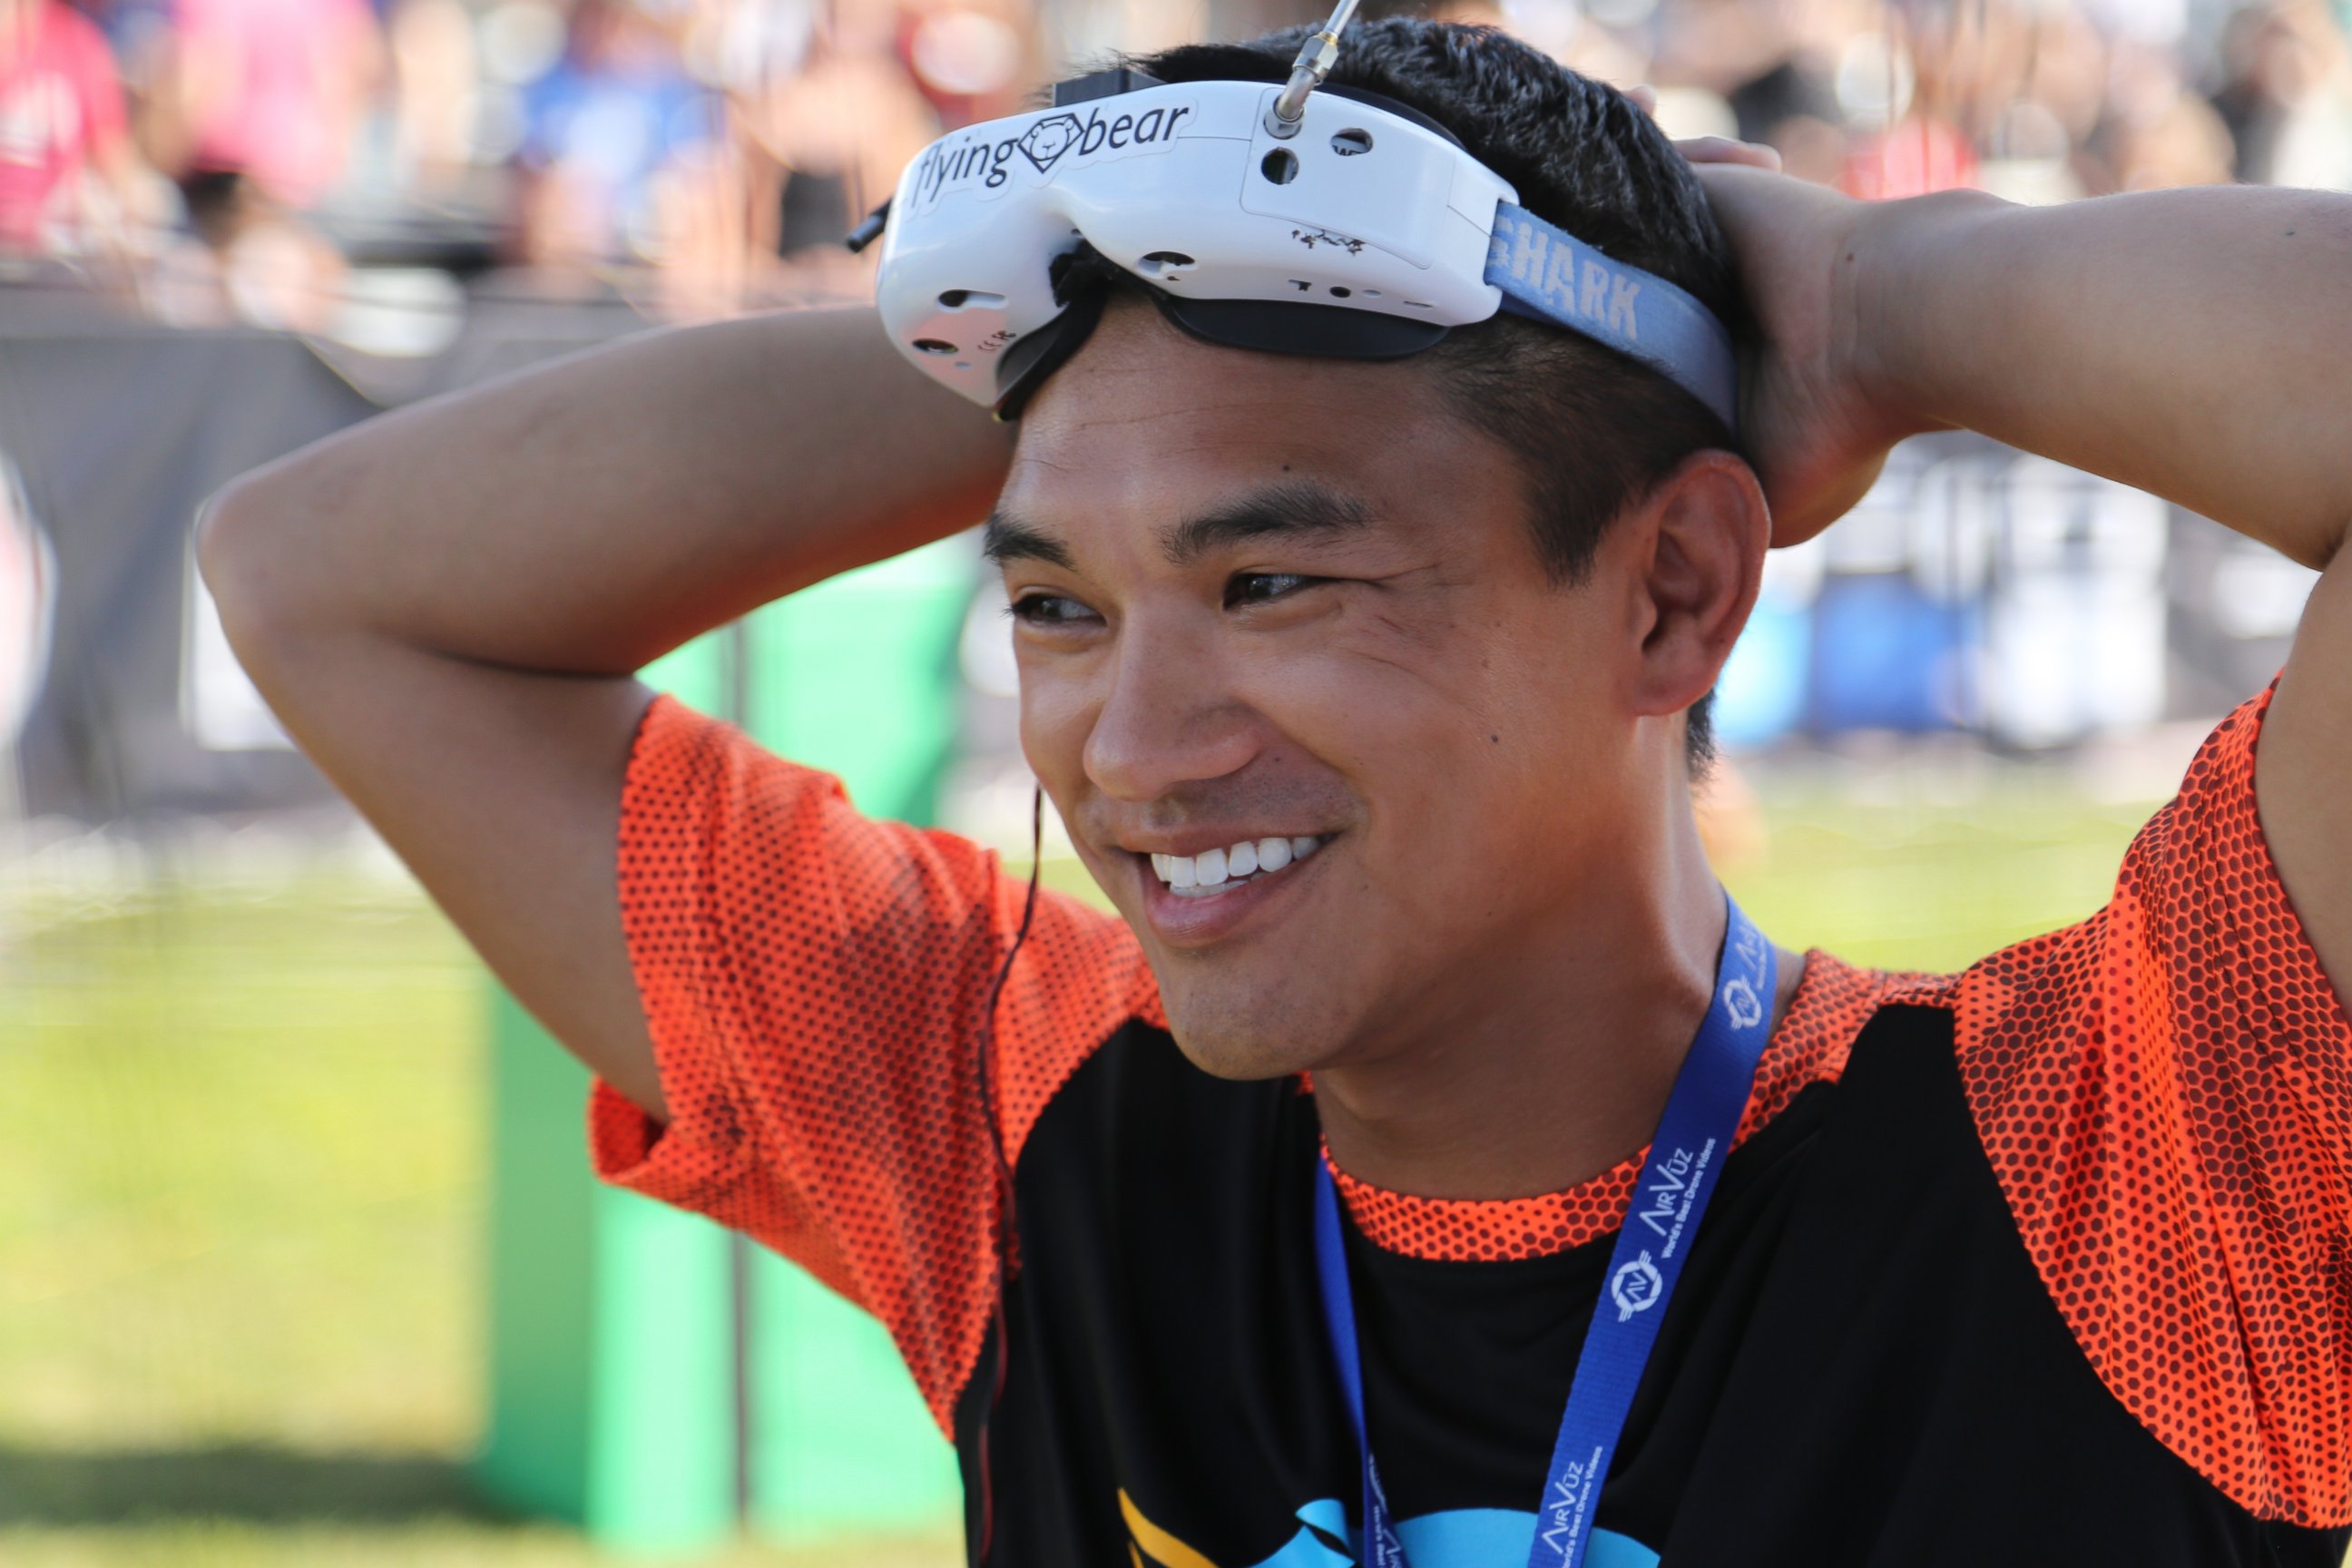 PHOTO: Ken Loo (pictured) from Sunnyvale, California, has been training for months to compete in the National Drone Racing Championships on Governors Island, Aug. 5, 2016 in New York.